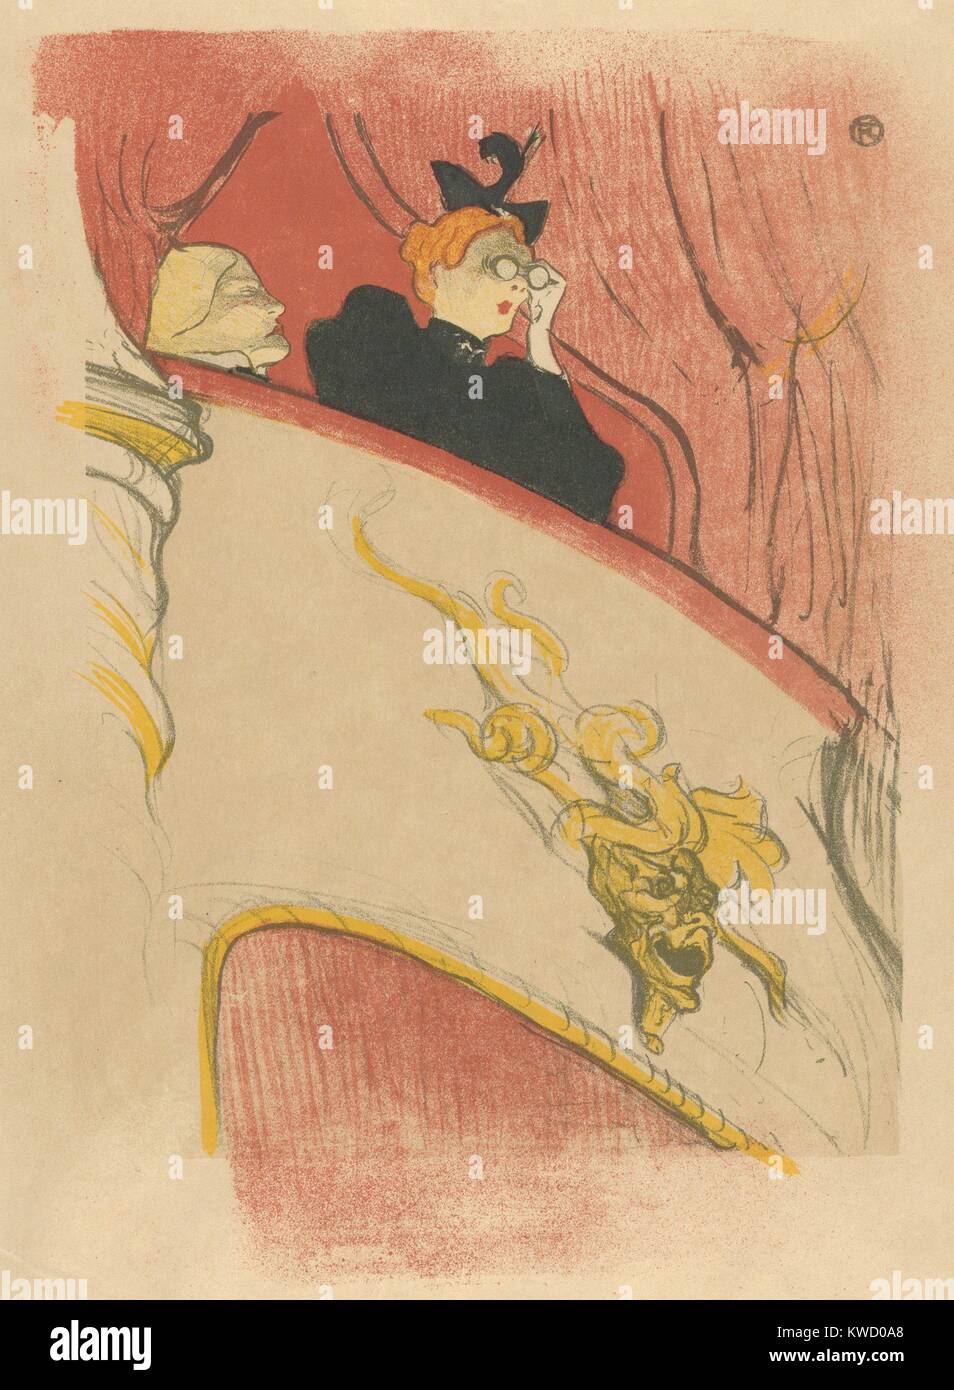 The Box with the Gilded Mask, by Henri de Toulouse-Lautrec, 1894, French Post-Impressionist print. This lithograph was designed to decorate the playbill for Marcel Luguets Le Missionnaire at the Theatre Libre, Paris (BSLOC 2017 5 75) Stock Photo